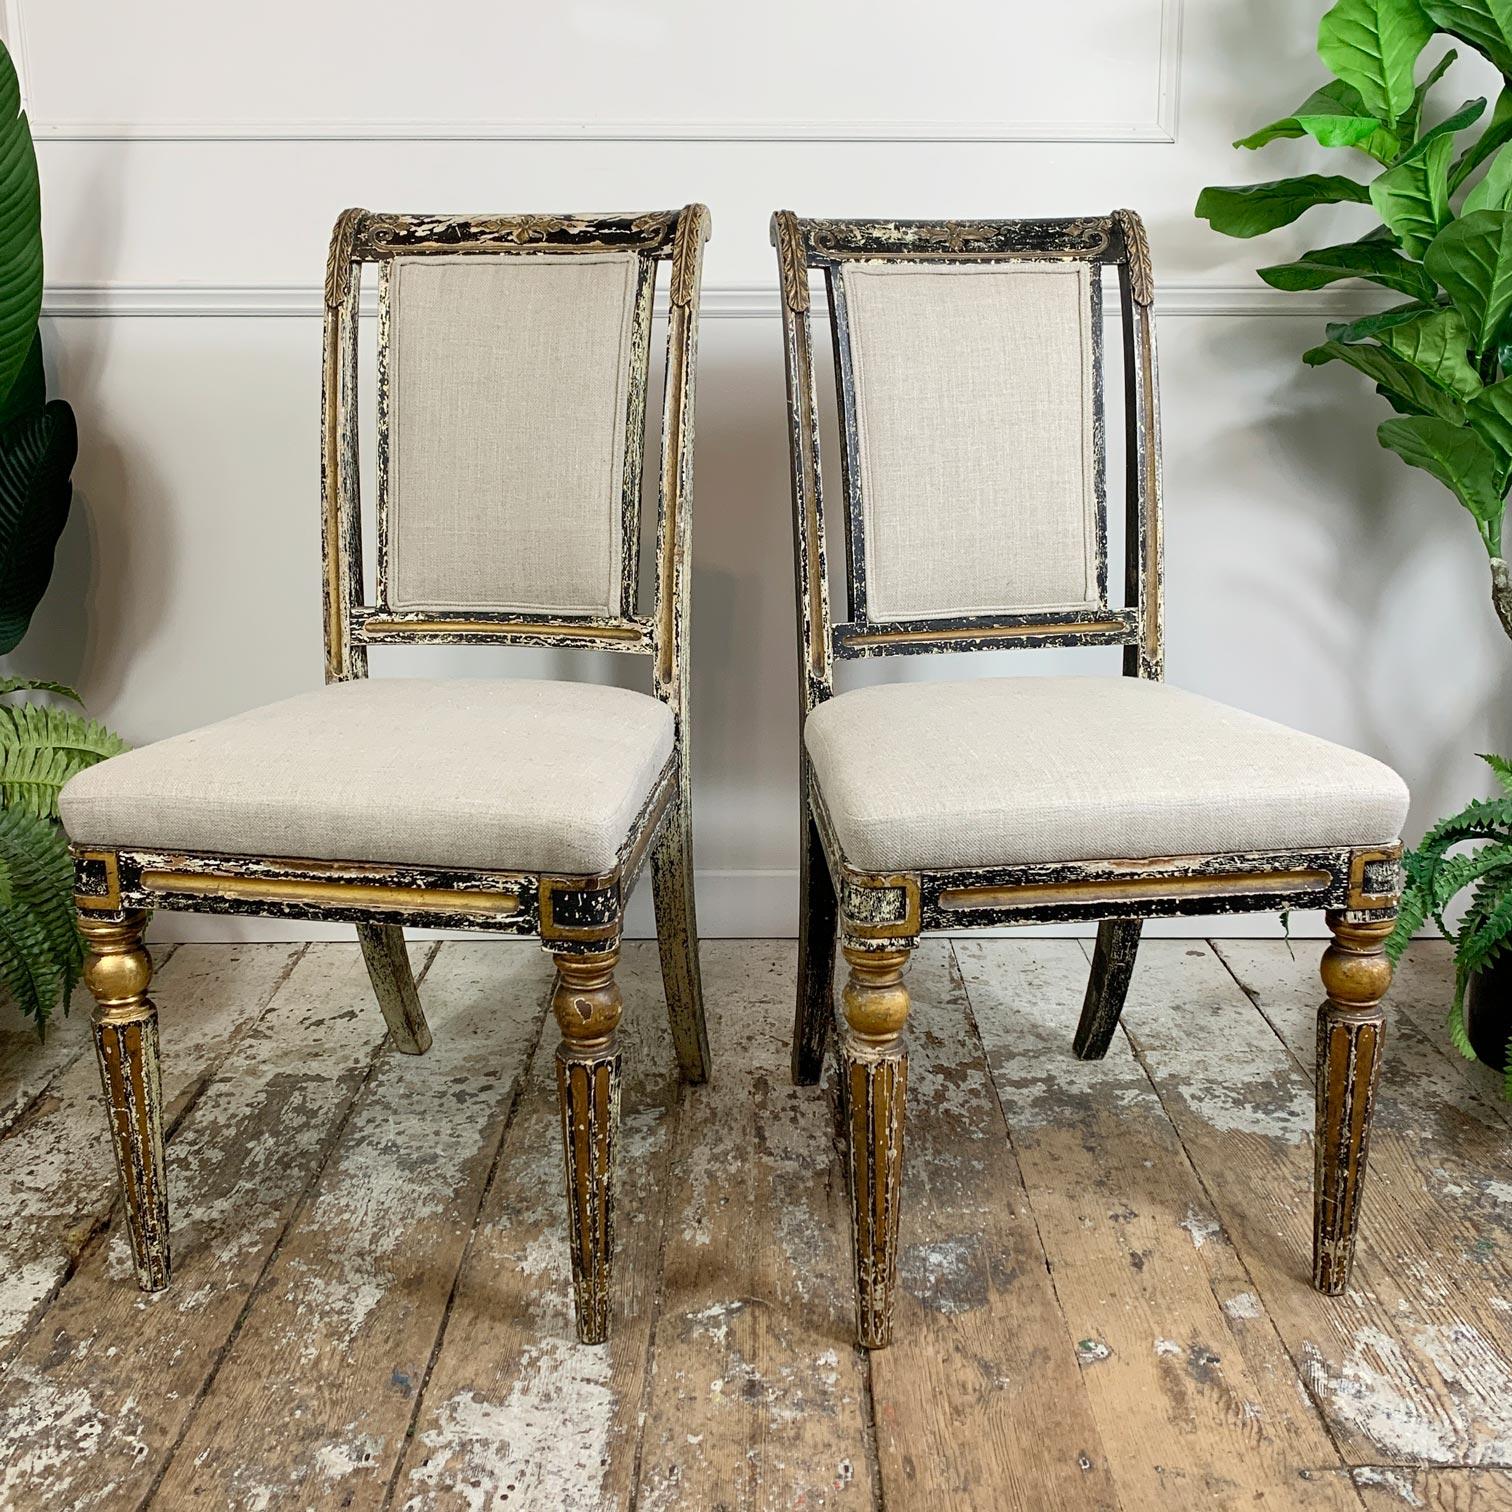 Pair of antique Regency black and gold dining chairs with sweeping curved back and legs. 

Fabulous shaping and curved design, detailed carvings to the back of the chair and gilt paint highlights across the frame and turned legs. 

These unique